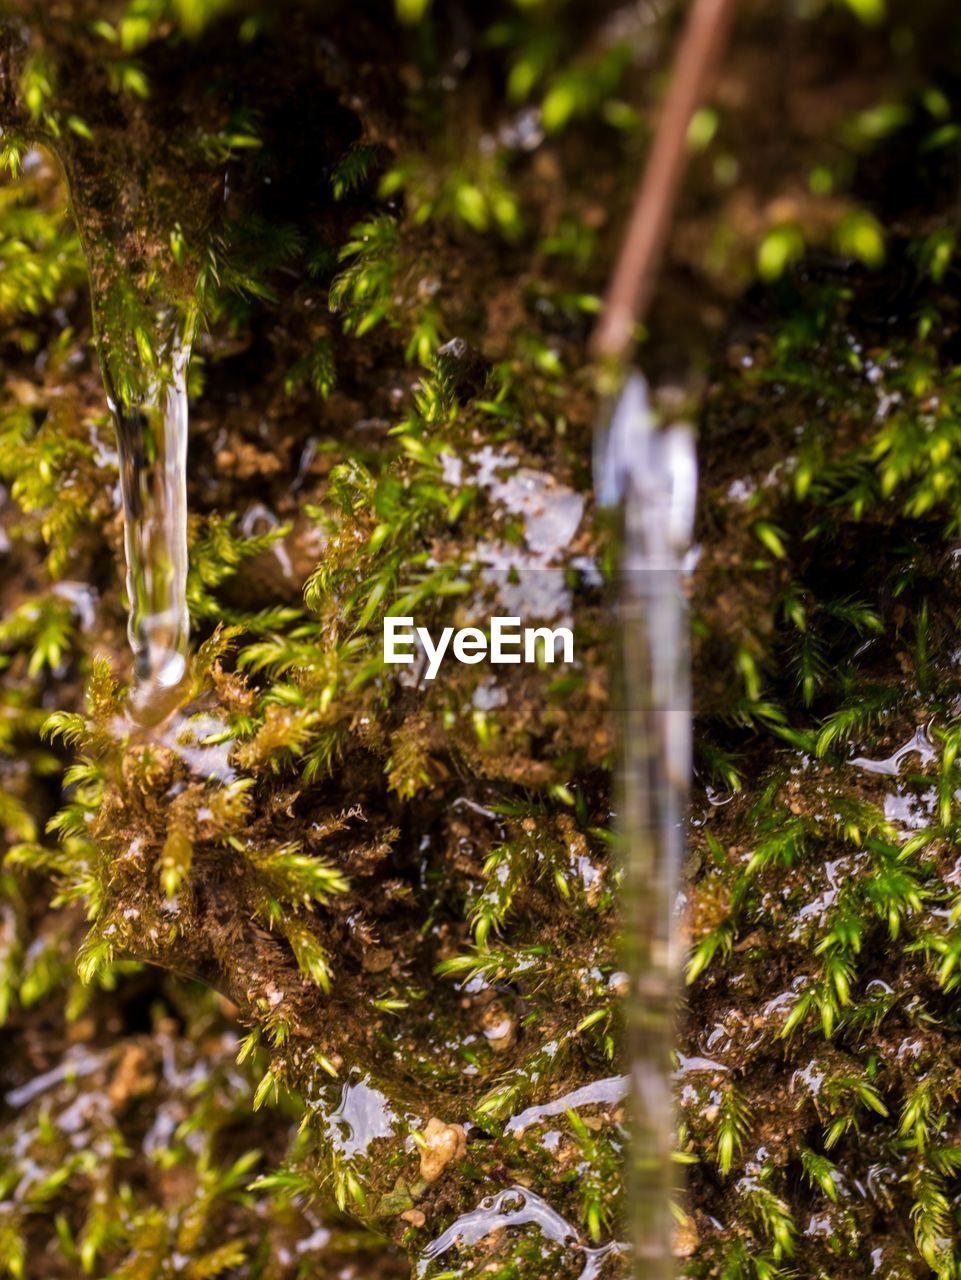 CLOSE-UP OF MOSS GROWING ON TREE